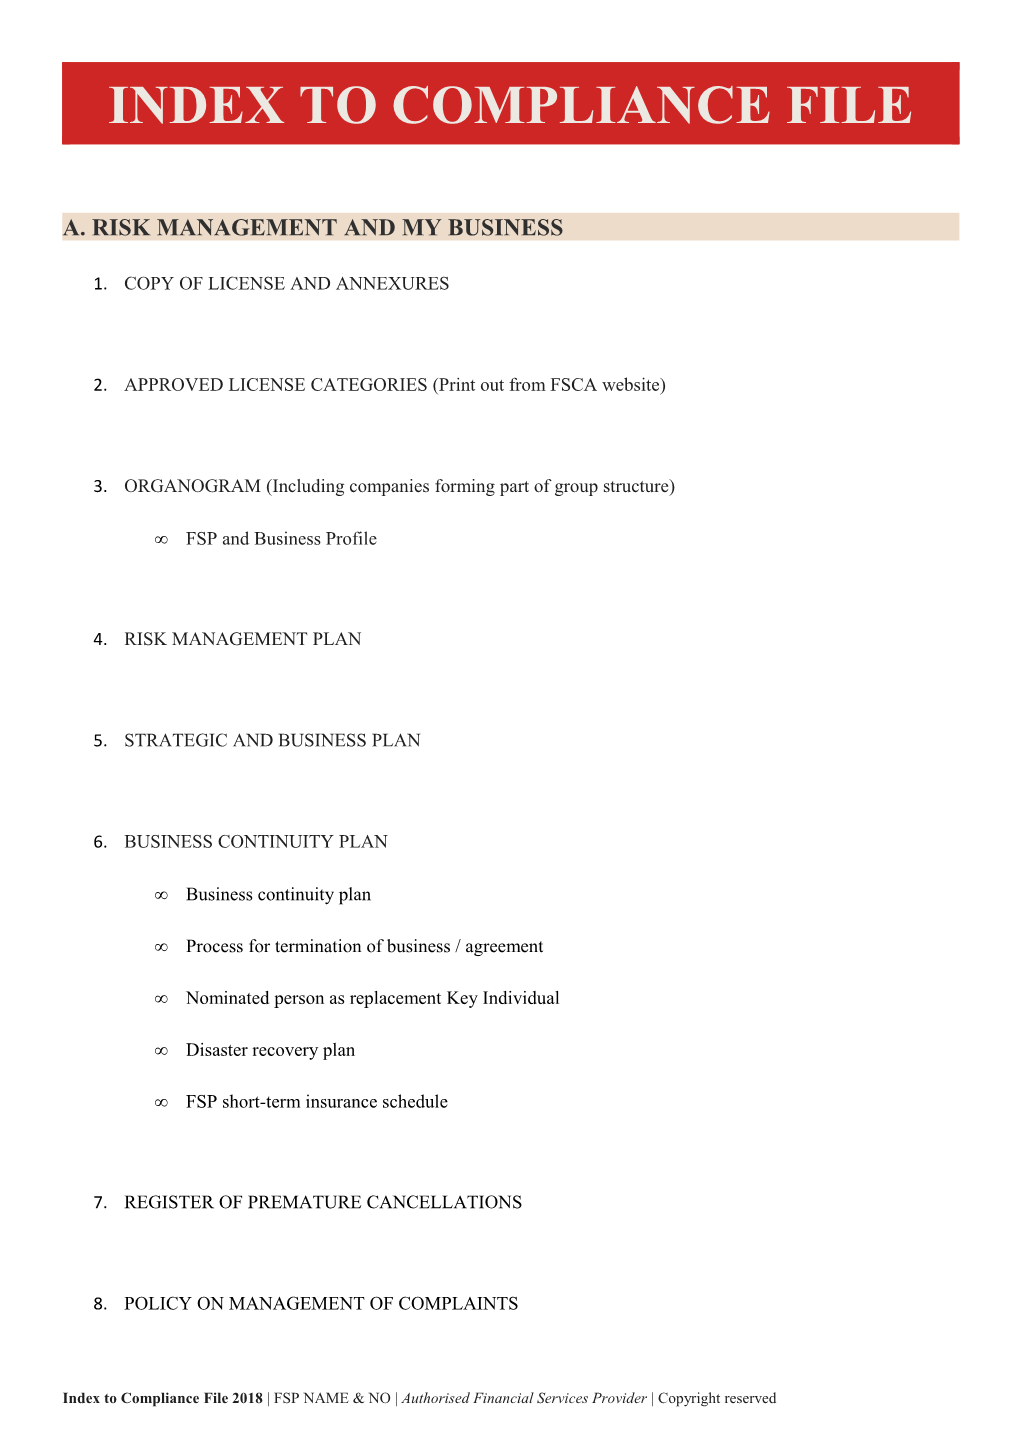 A. Risk Management and My Business